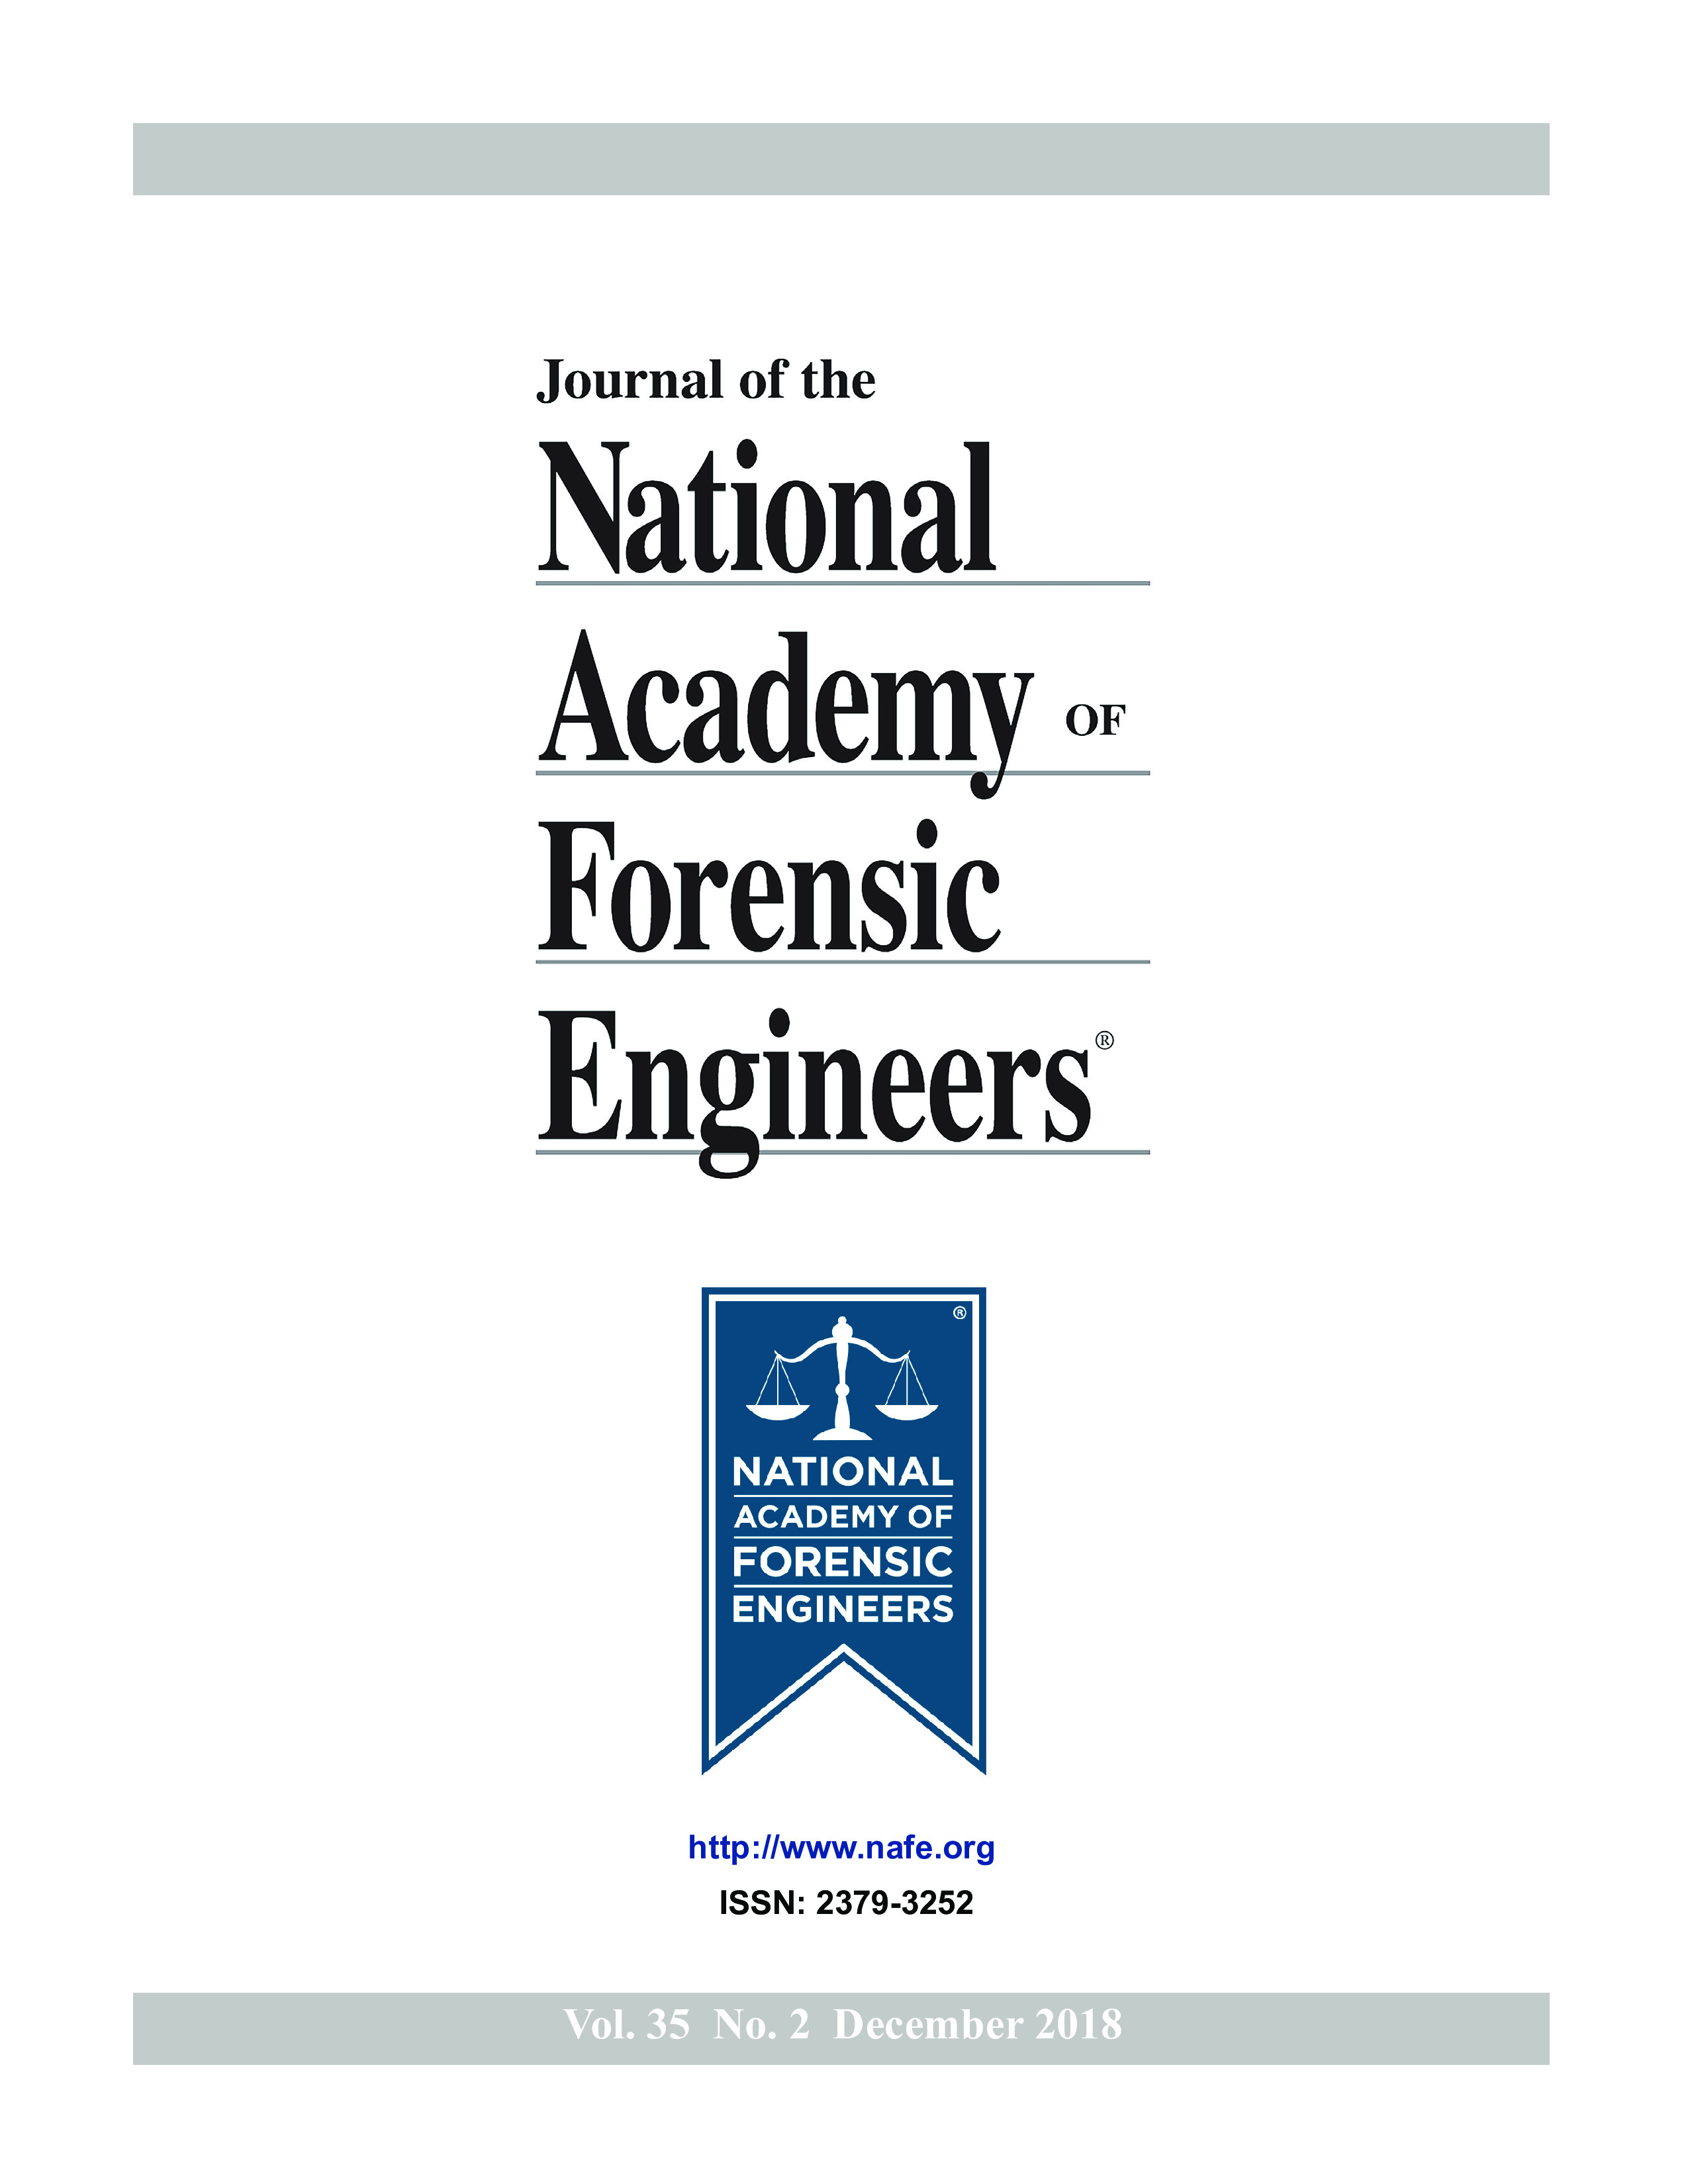 Cover of the Journal of the National Academy of Forensic Engineers